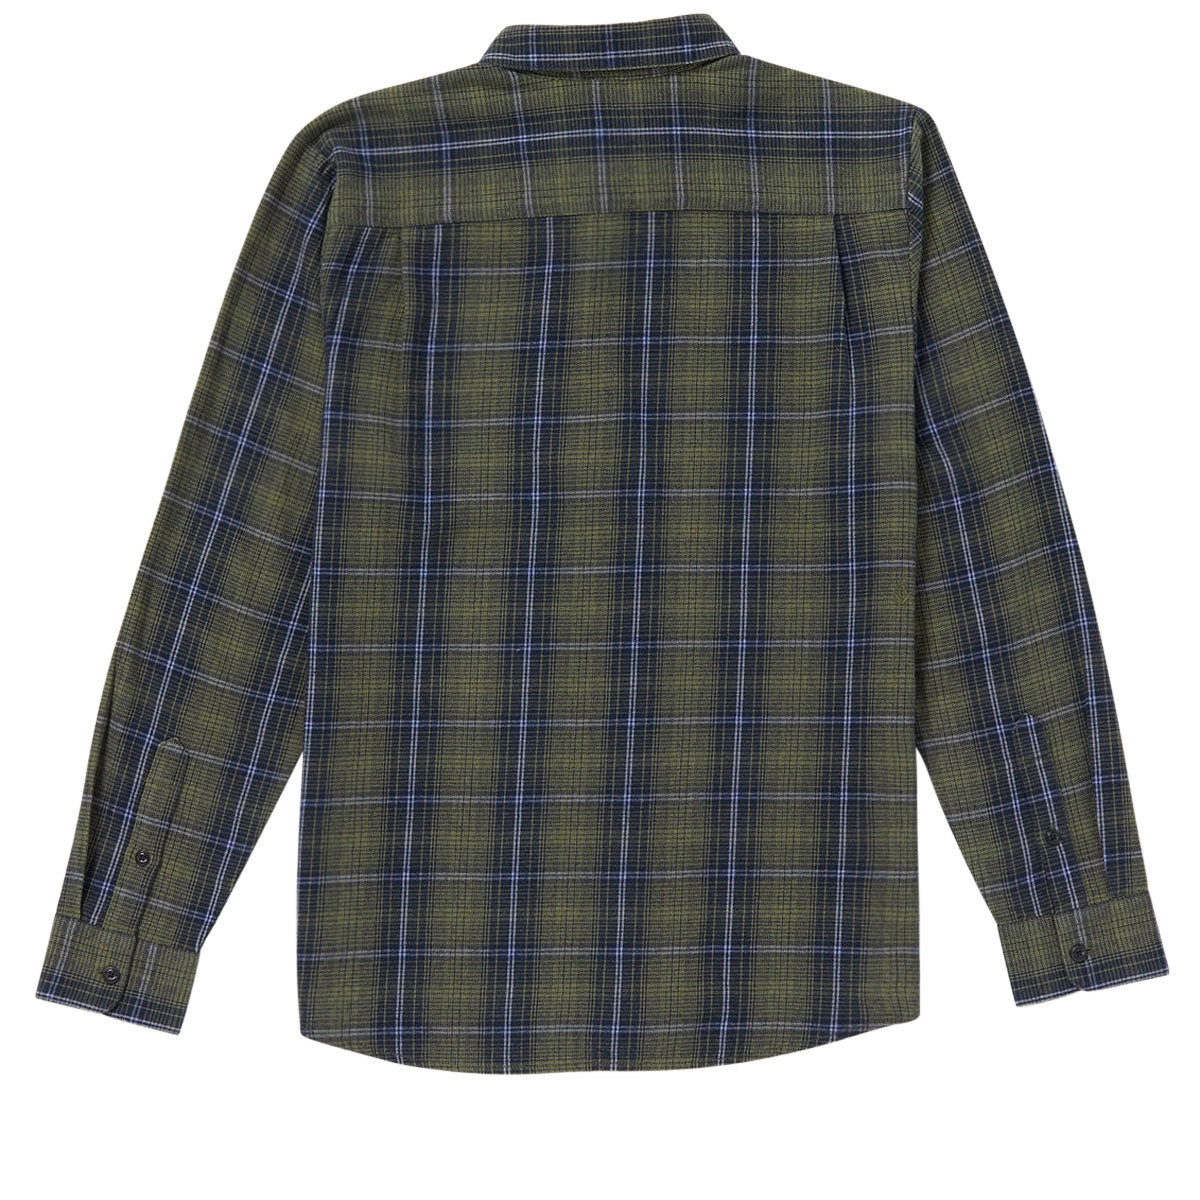 Volcom Heavy Twills Flannel Long Sleeve Shirt - Old Mill image 2